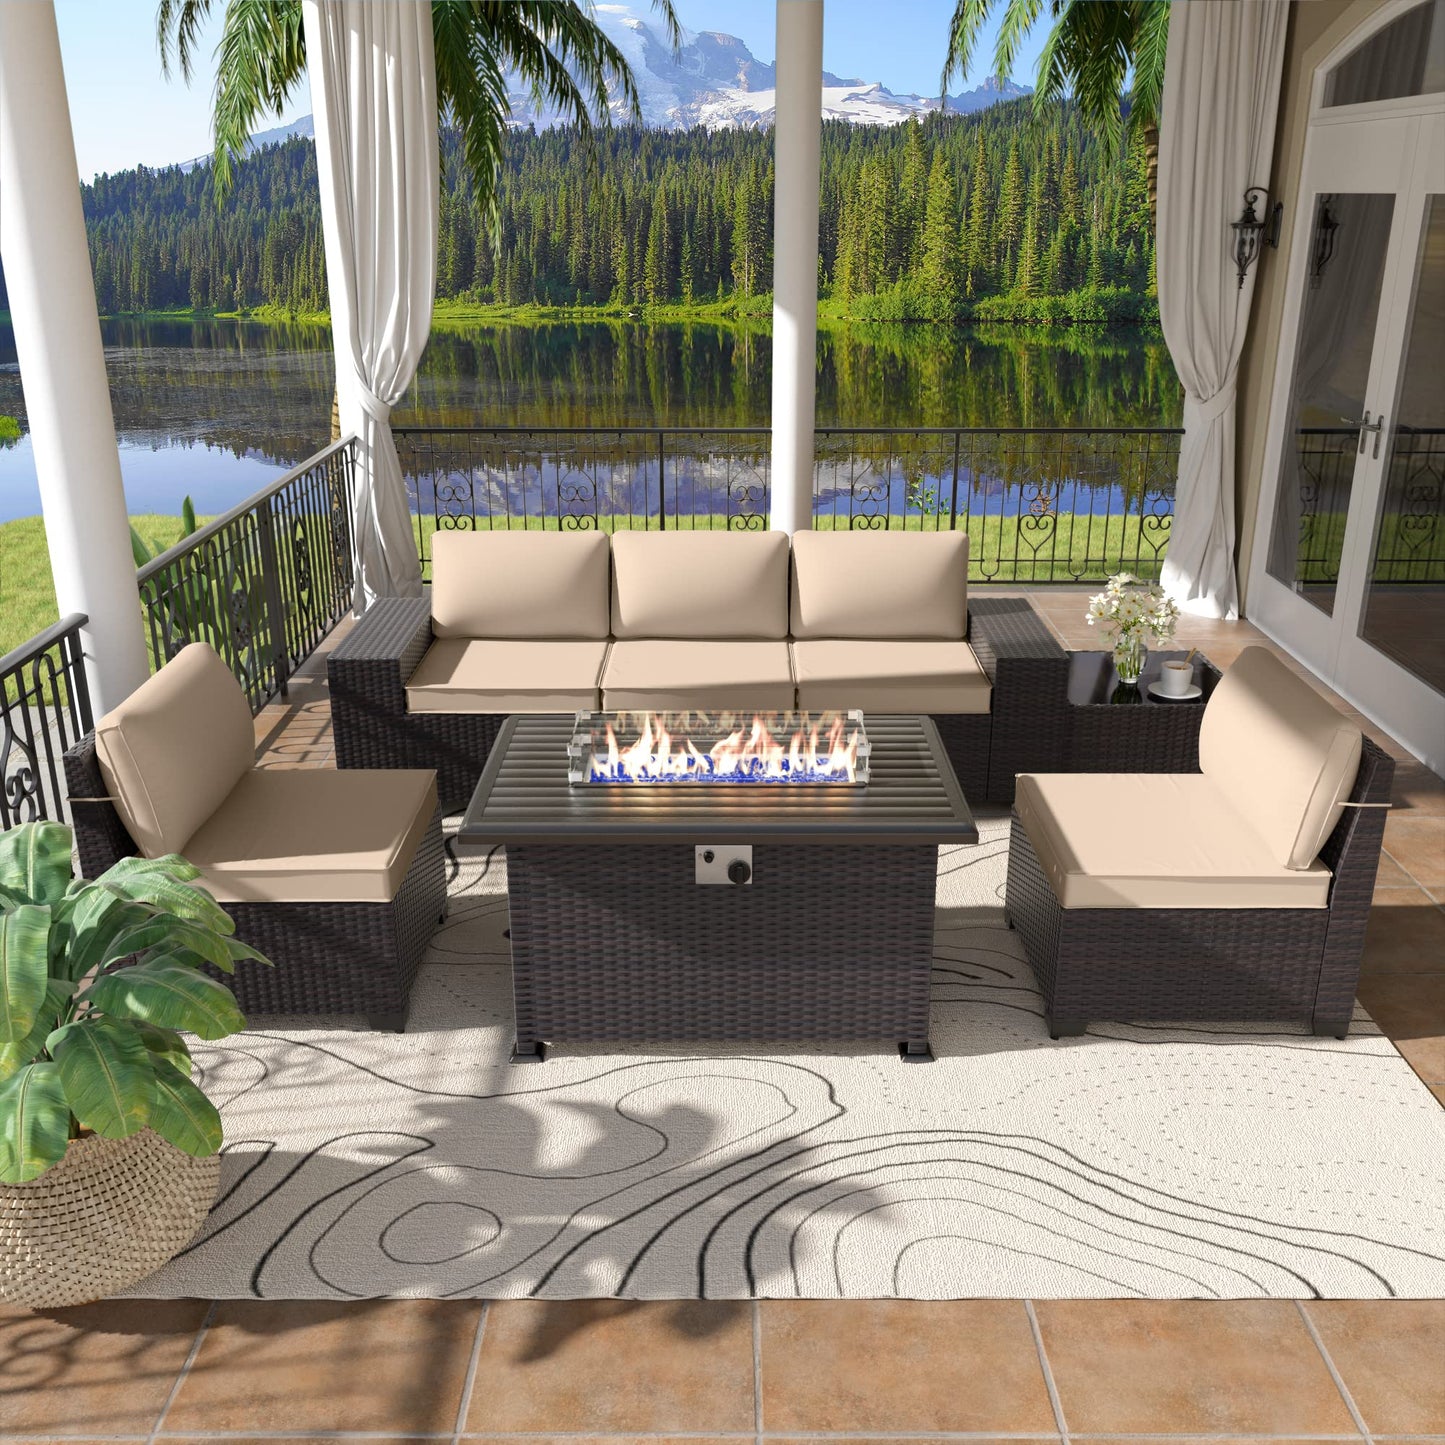 ALAULM 7 Pieces Outdoor Patio Furniture Set with Propane Fire Pit Table Patio Sectional Sofa Sets - Sand